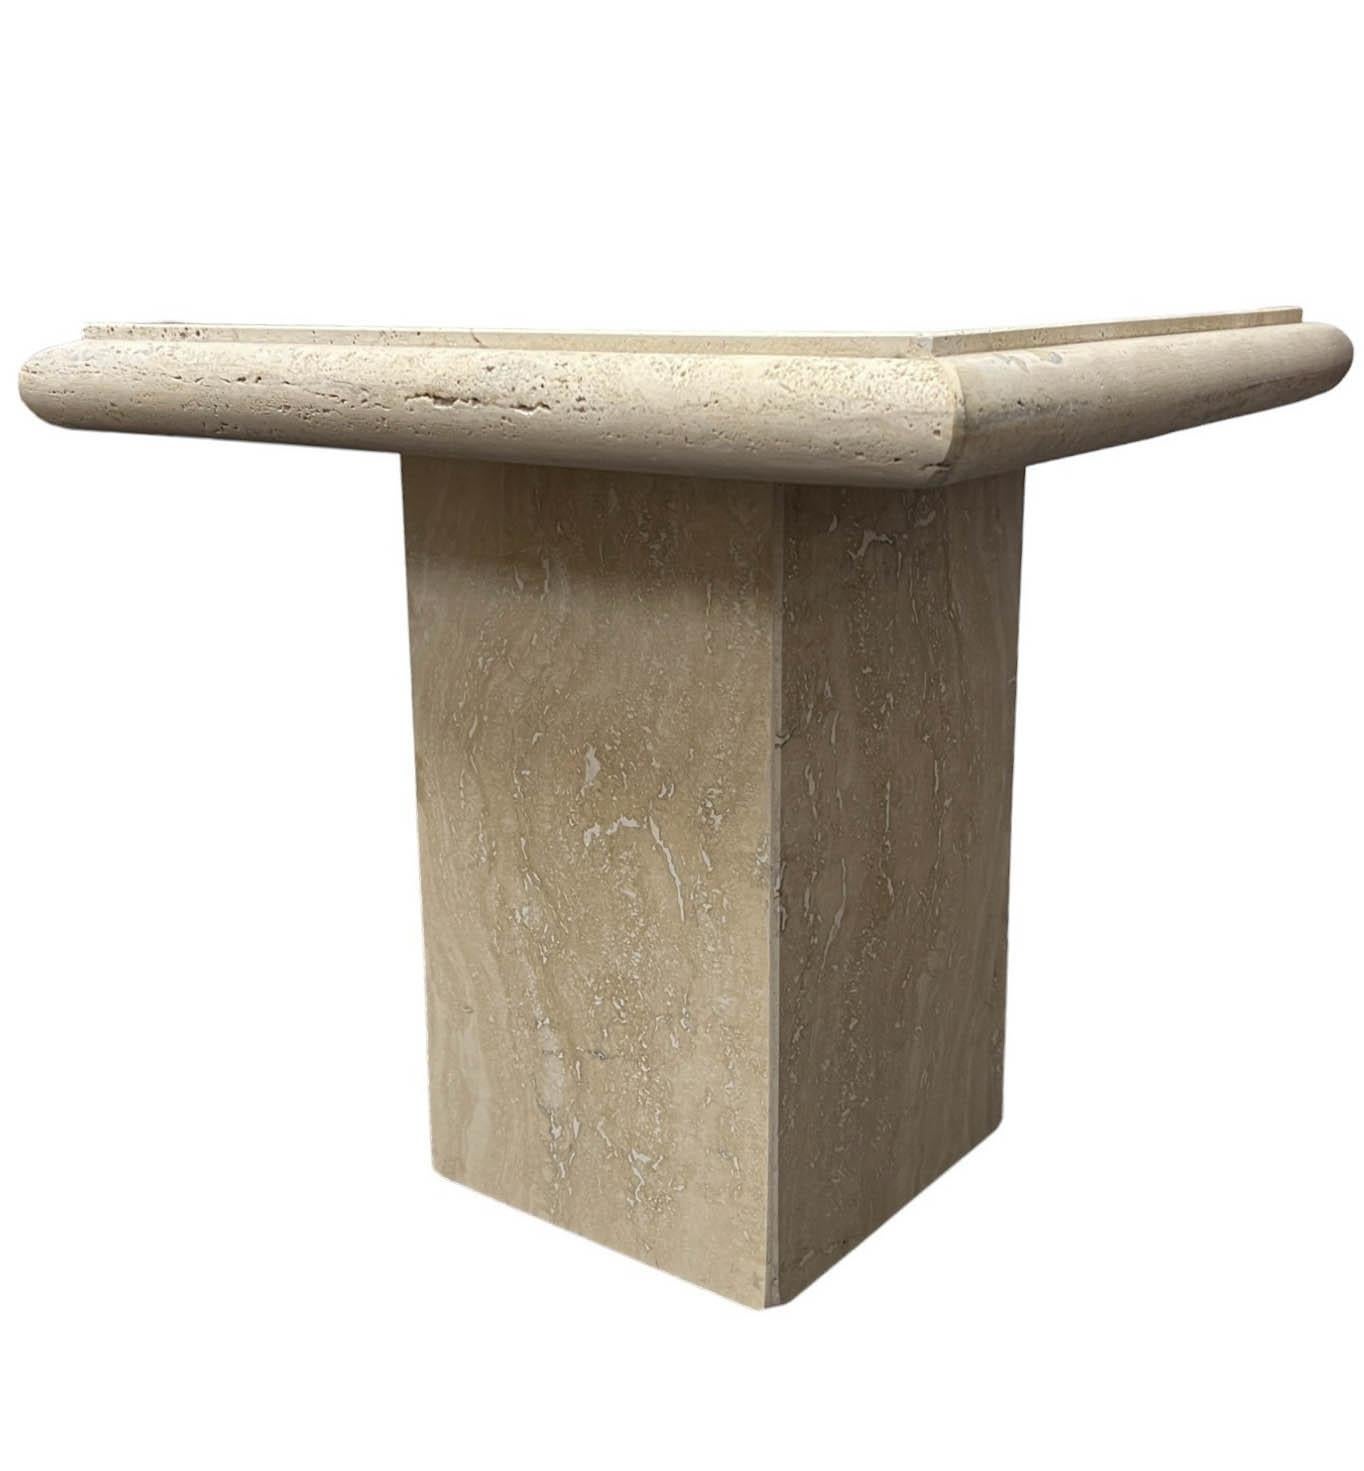 Vintage Post-Modern Travertine Marble Pedestal Table In Good Condition For Sale In Palm Beach Gardens, FL